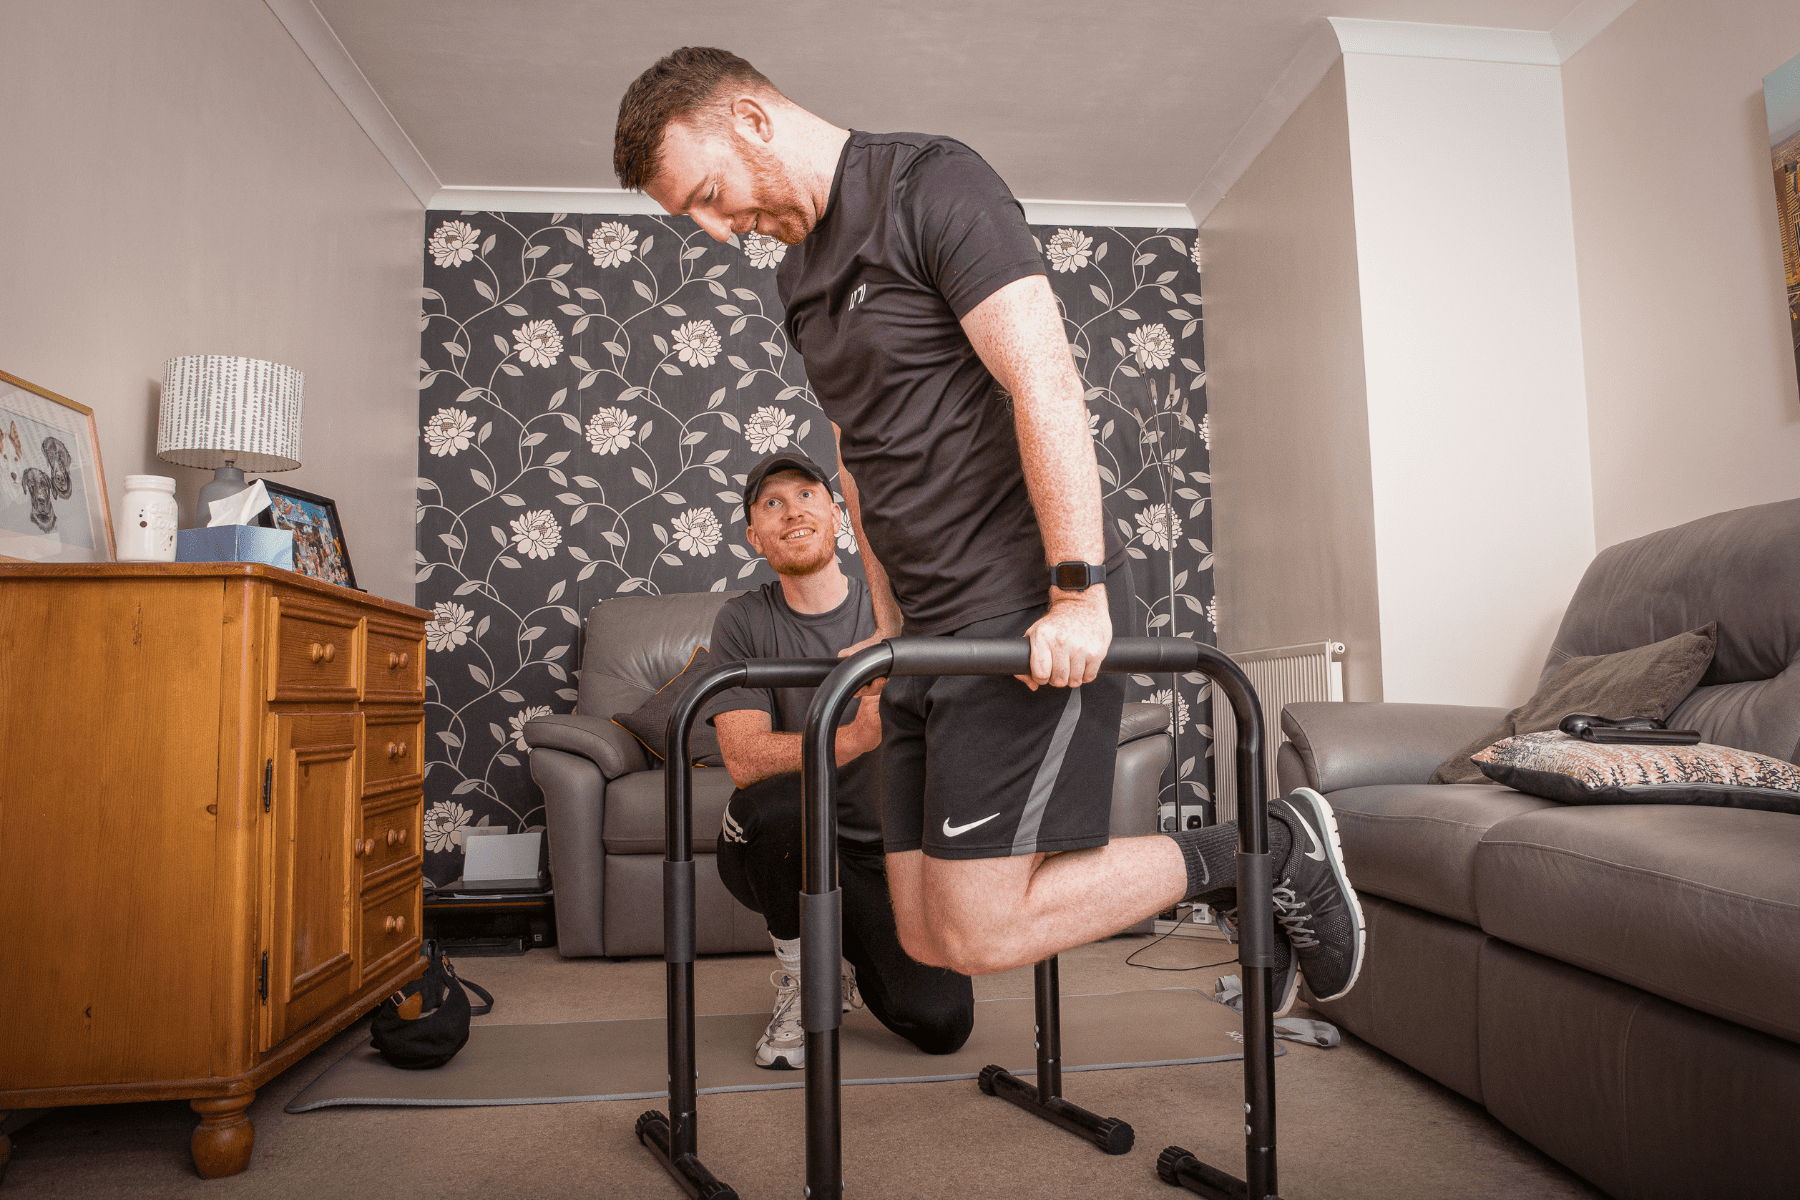 At home personal training using parallel bar dips